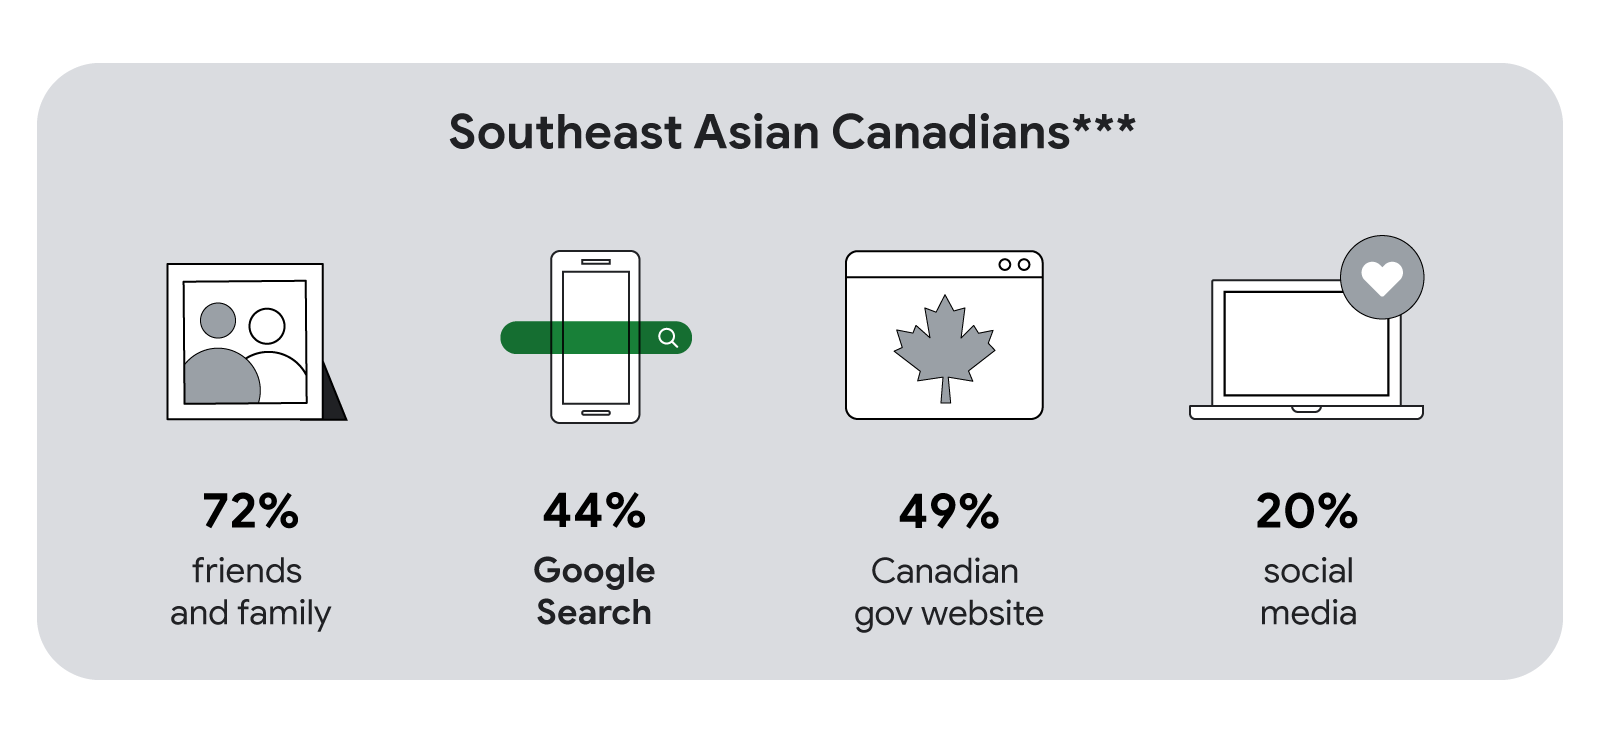 An array of icons showing how Southeast Asian Canadians*** find information: 72% through friends and family, 44% Google Search, 49% Canadian government website, and 20% social media.